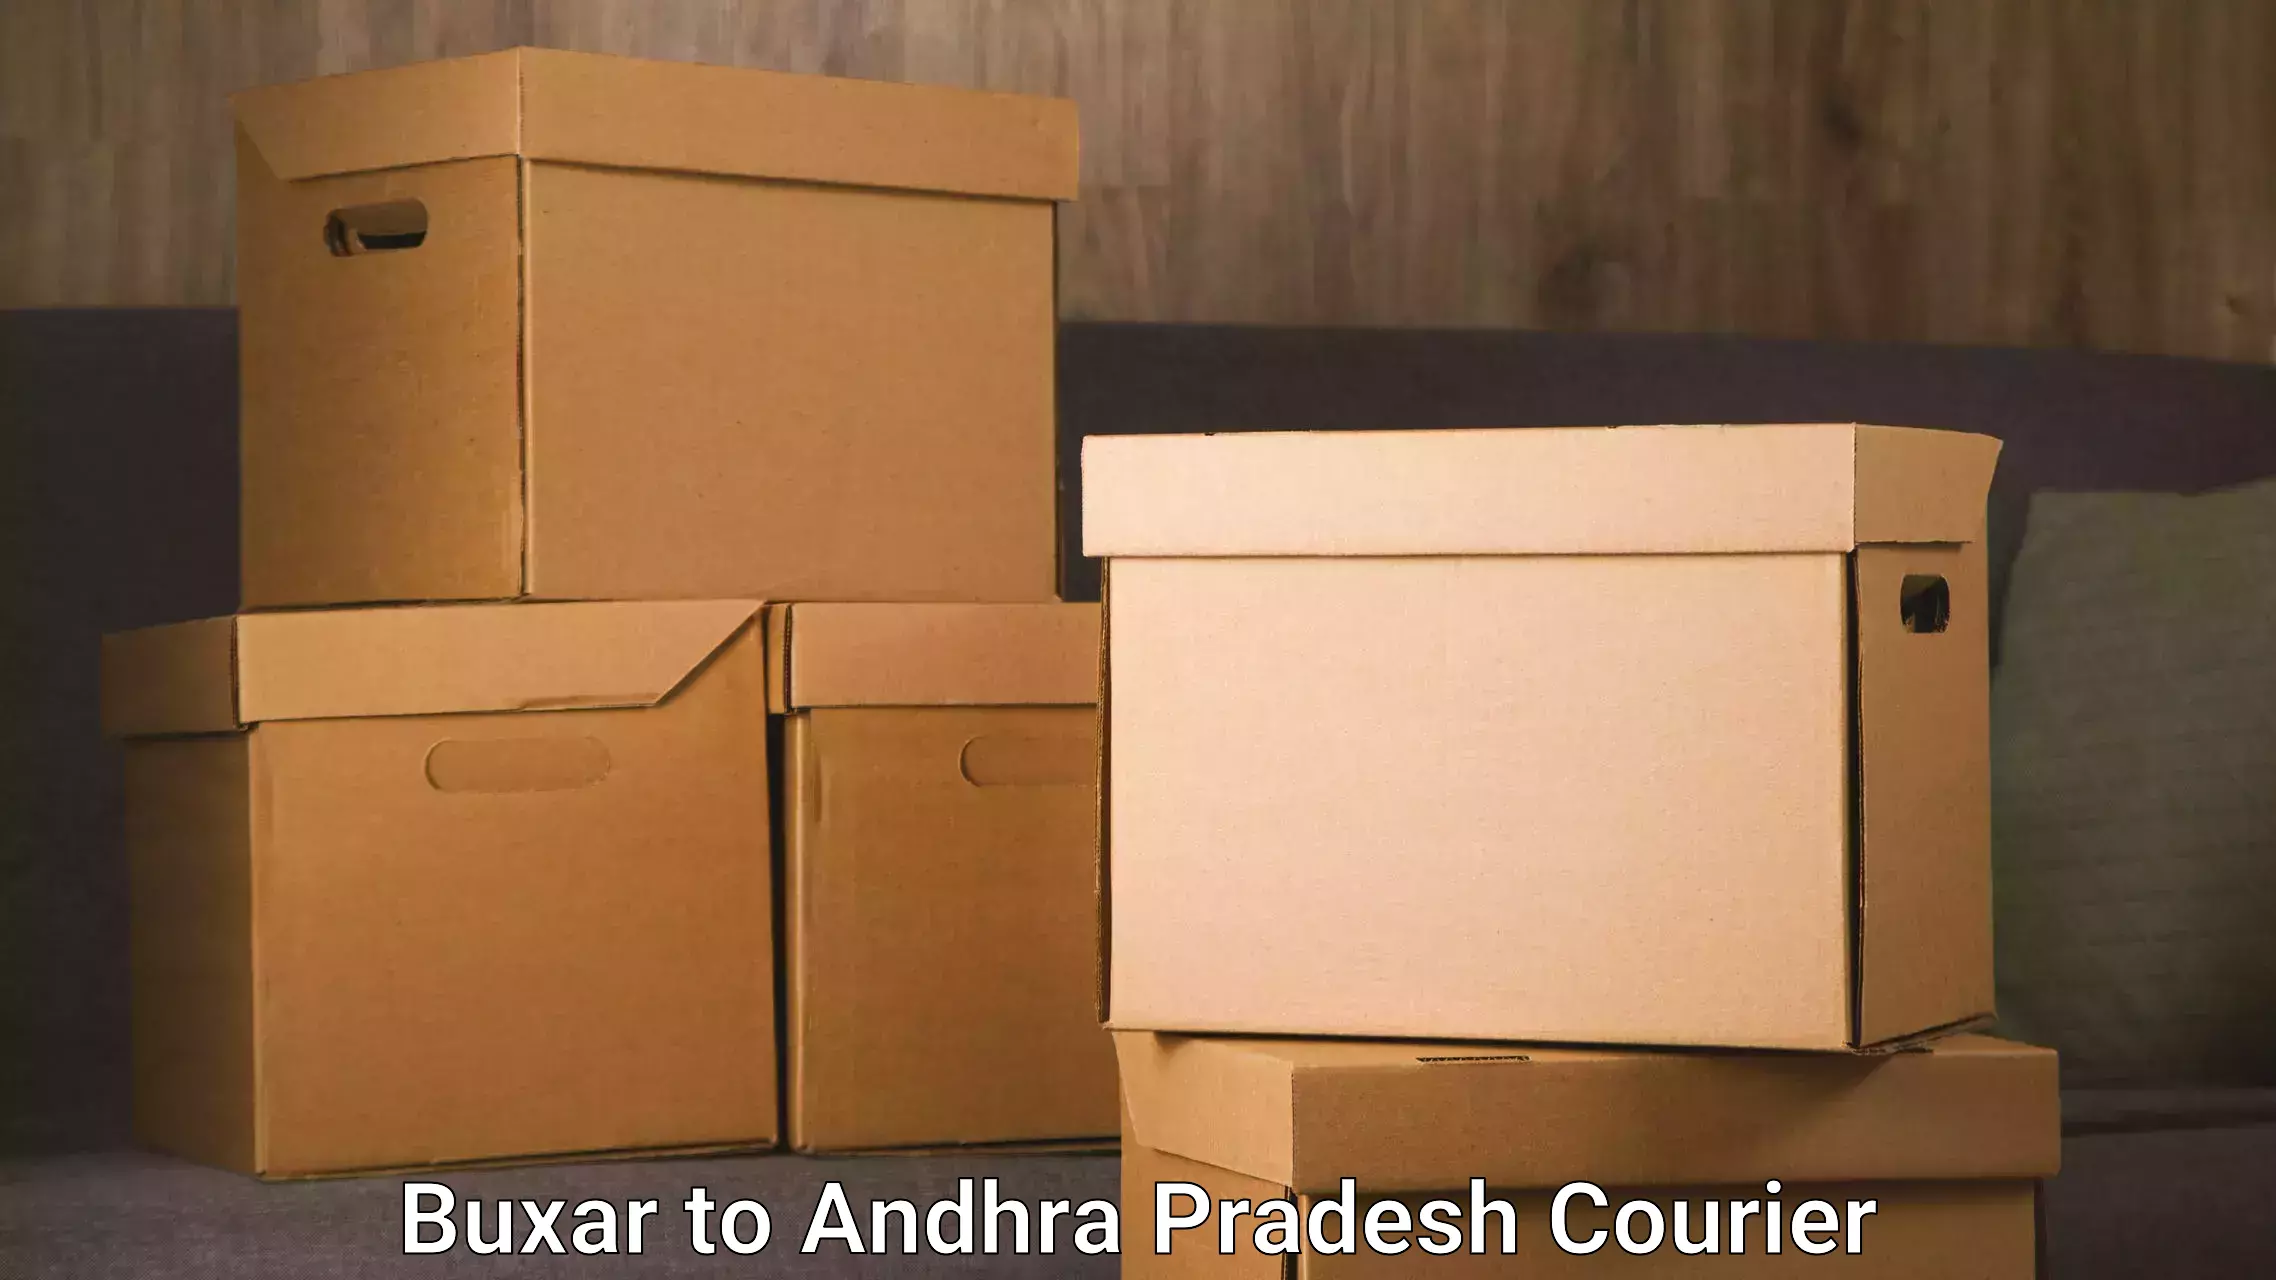 Furniture delivery service Buxar to Alur